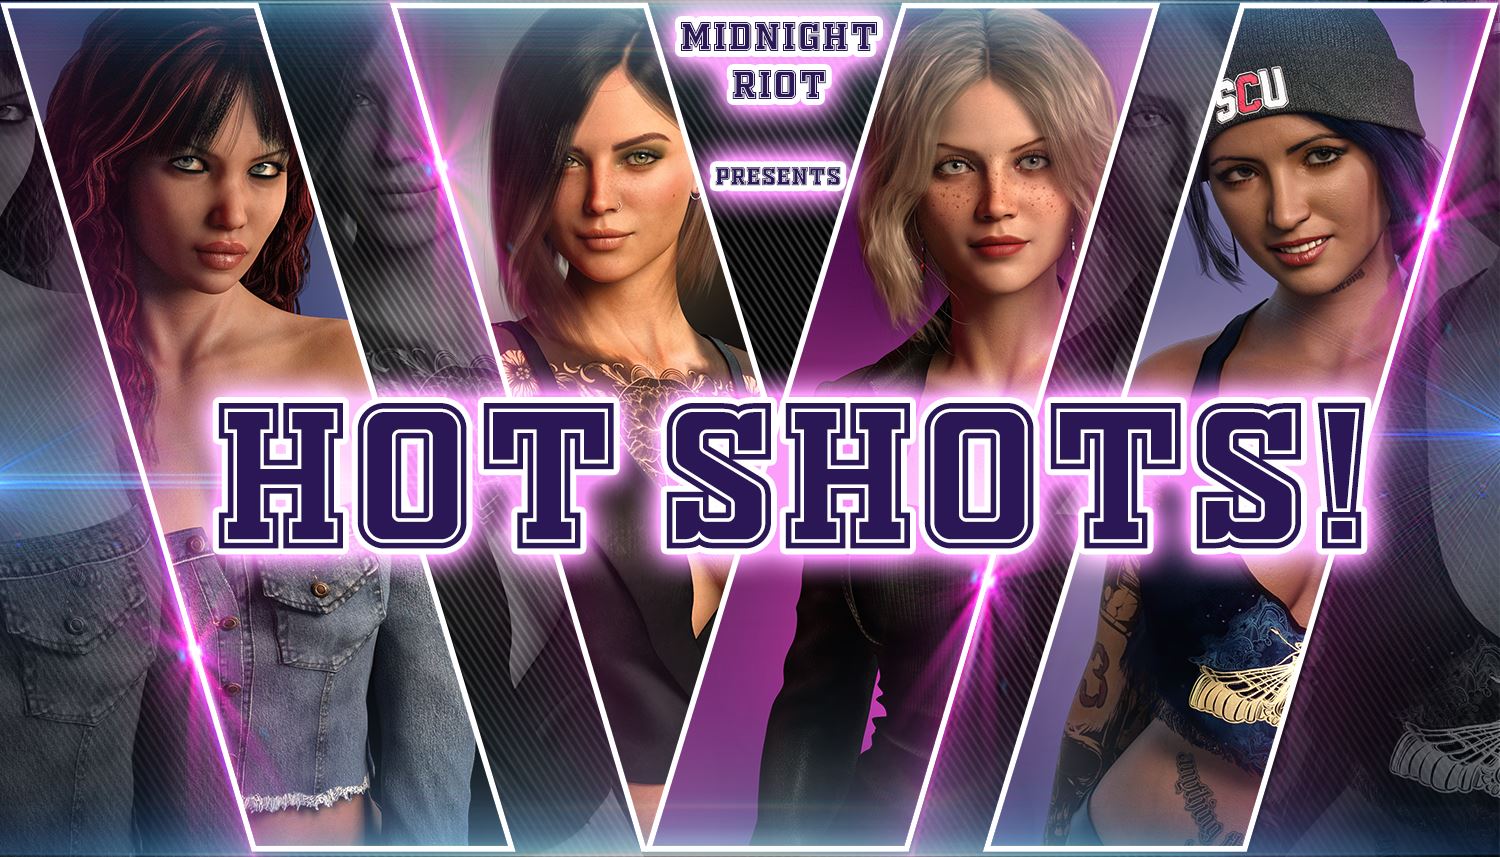 Xxx Hot Mid Night - Hot Shots! Ren'Py Porn Sex Game v.0.1.2a Download for Windows, MacOS,  Linux, Android